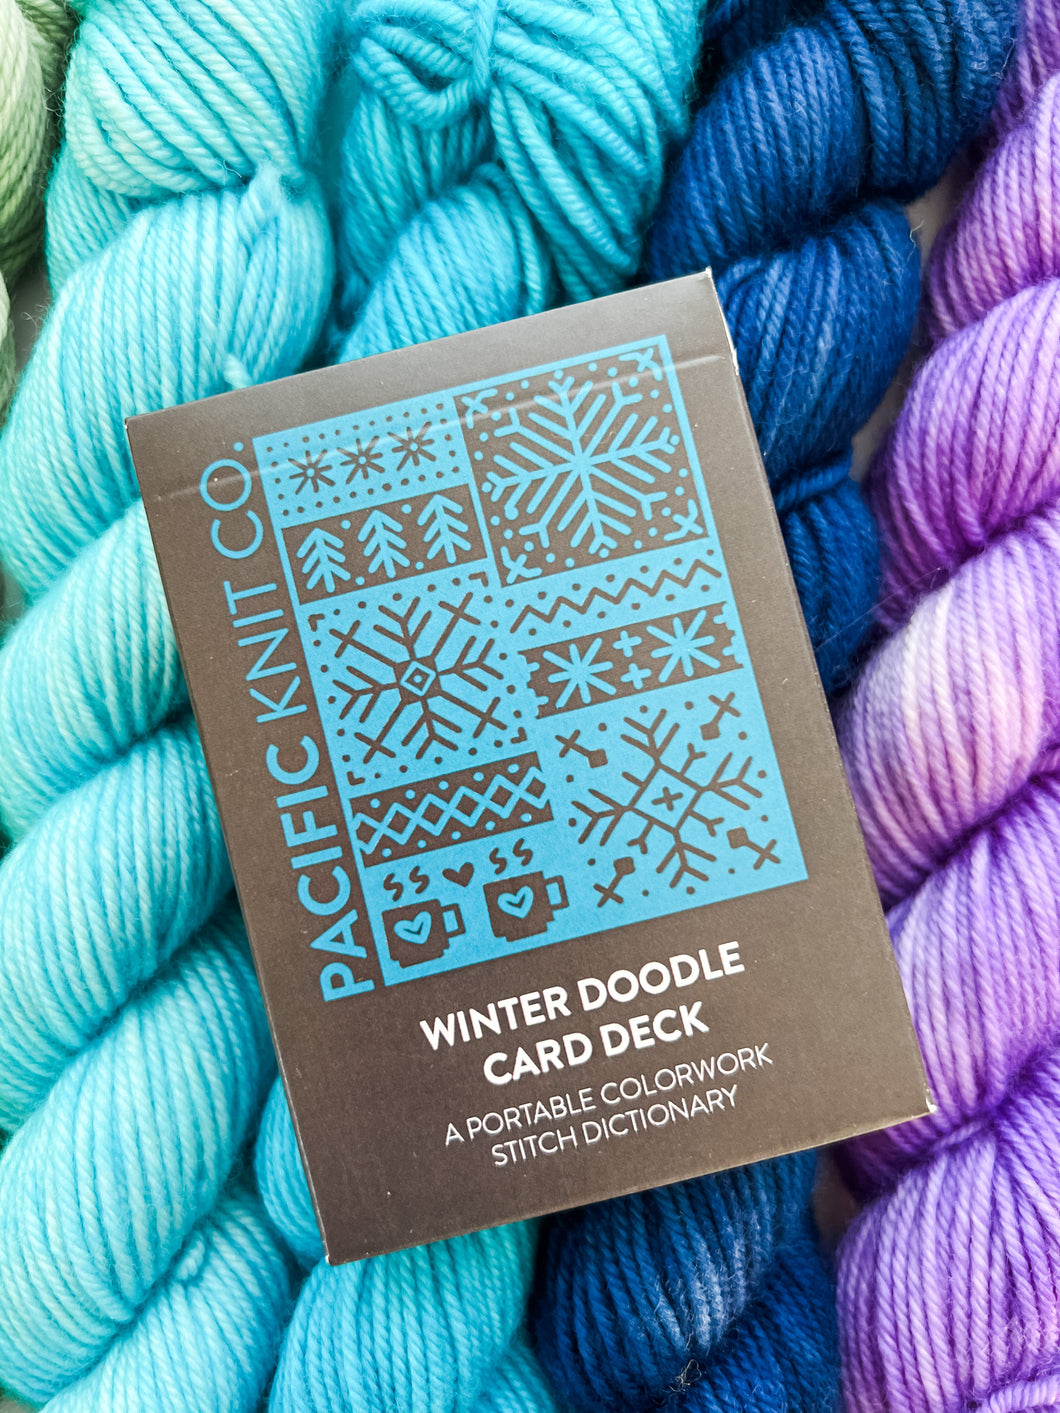 Pacific Knit Co. - Winter Doodle Card Full Deck